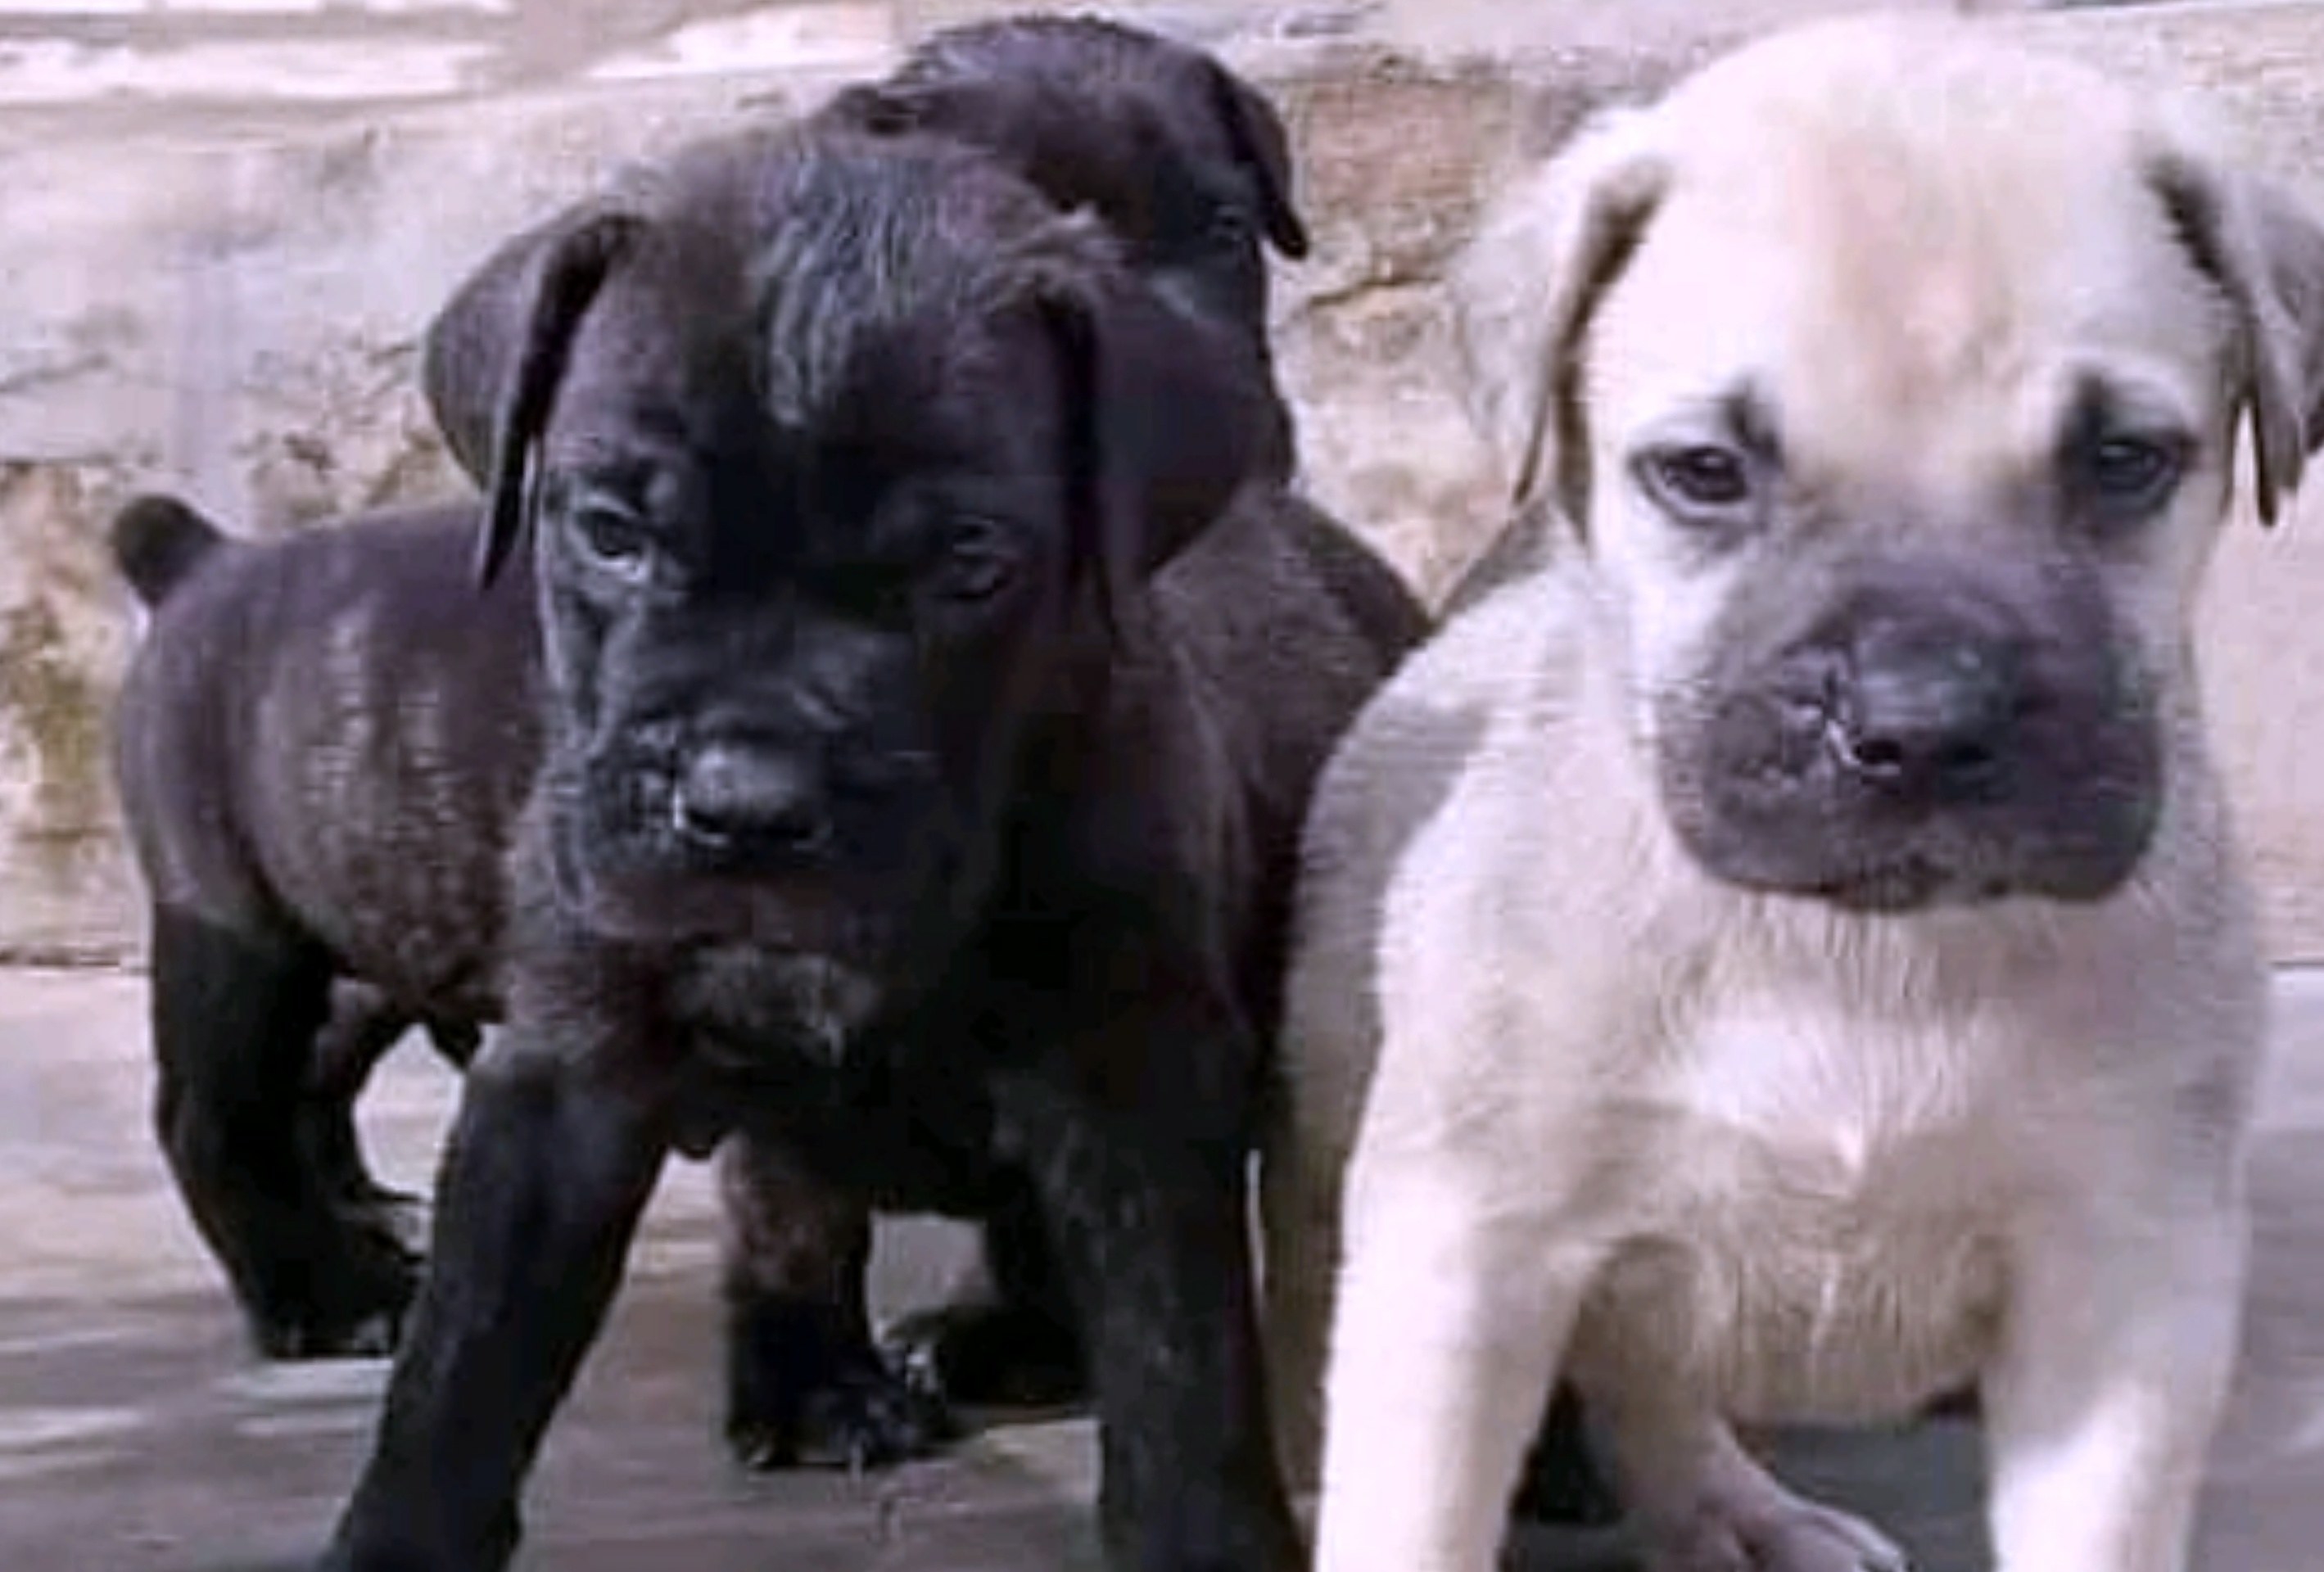 Two cute puppies, one black and another white, are playing together